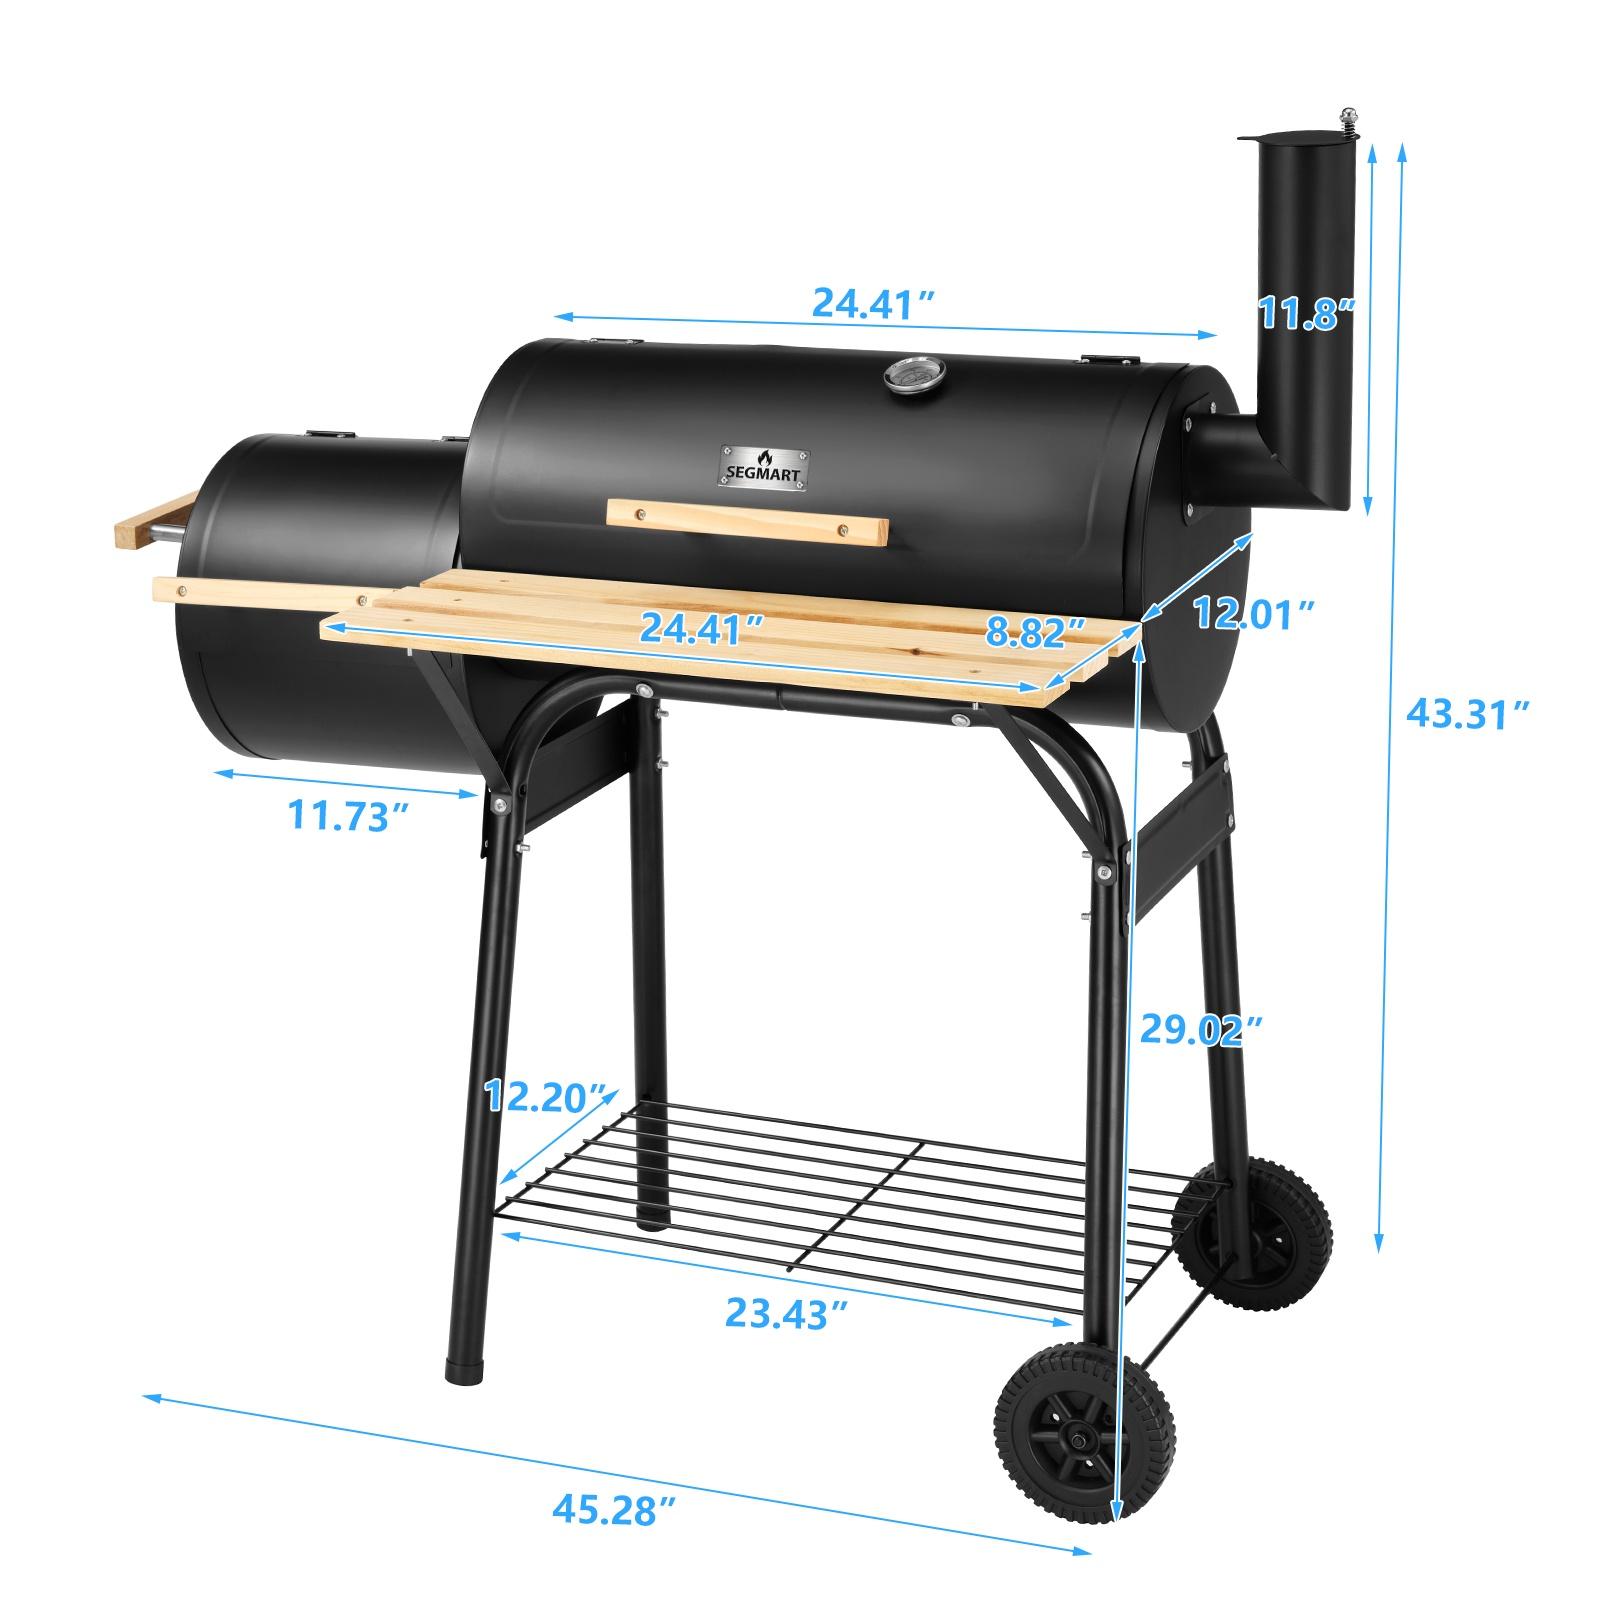 BBQ Charcoal Grill, 45.28-Inch Length Portable Barbecue Grill, Offset Smoker Barbecue Oven with Wheels & Thermometer for Outdoor Picnic Camping Patio Backyard, B026 - image 3 of 8